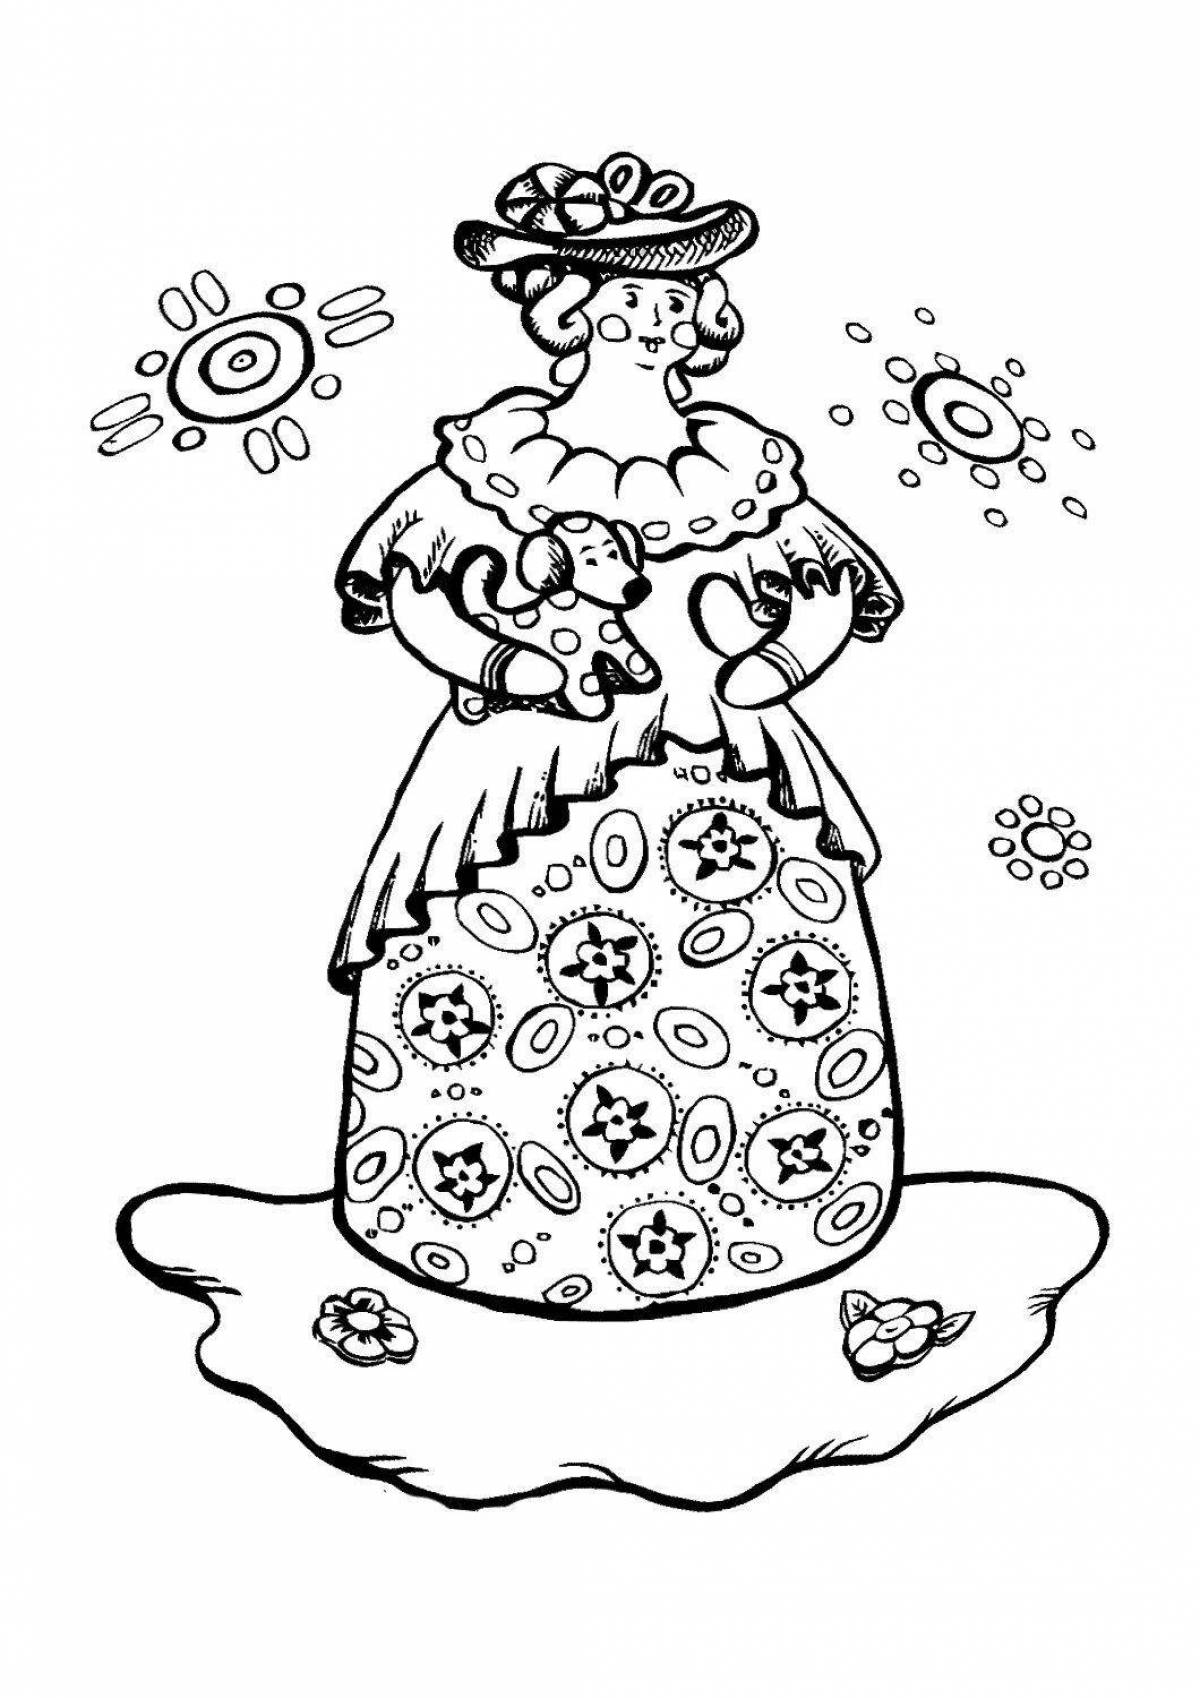 Colorful russian folk art coloring page